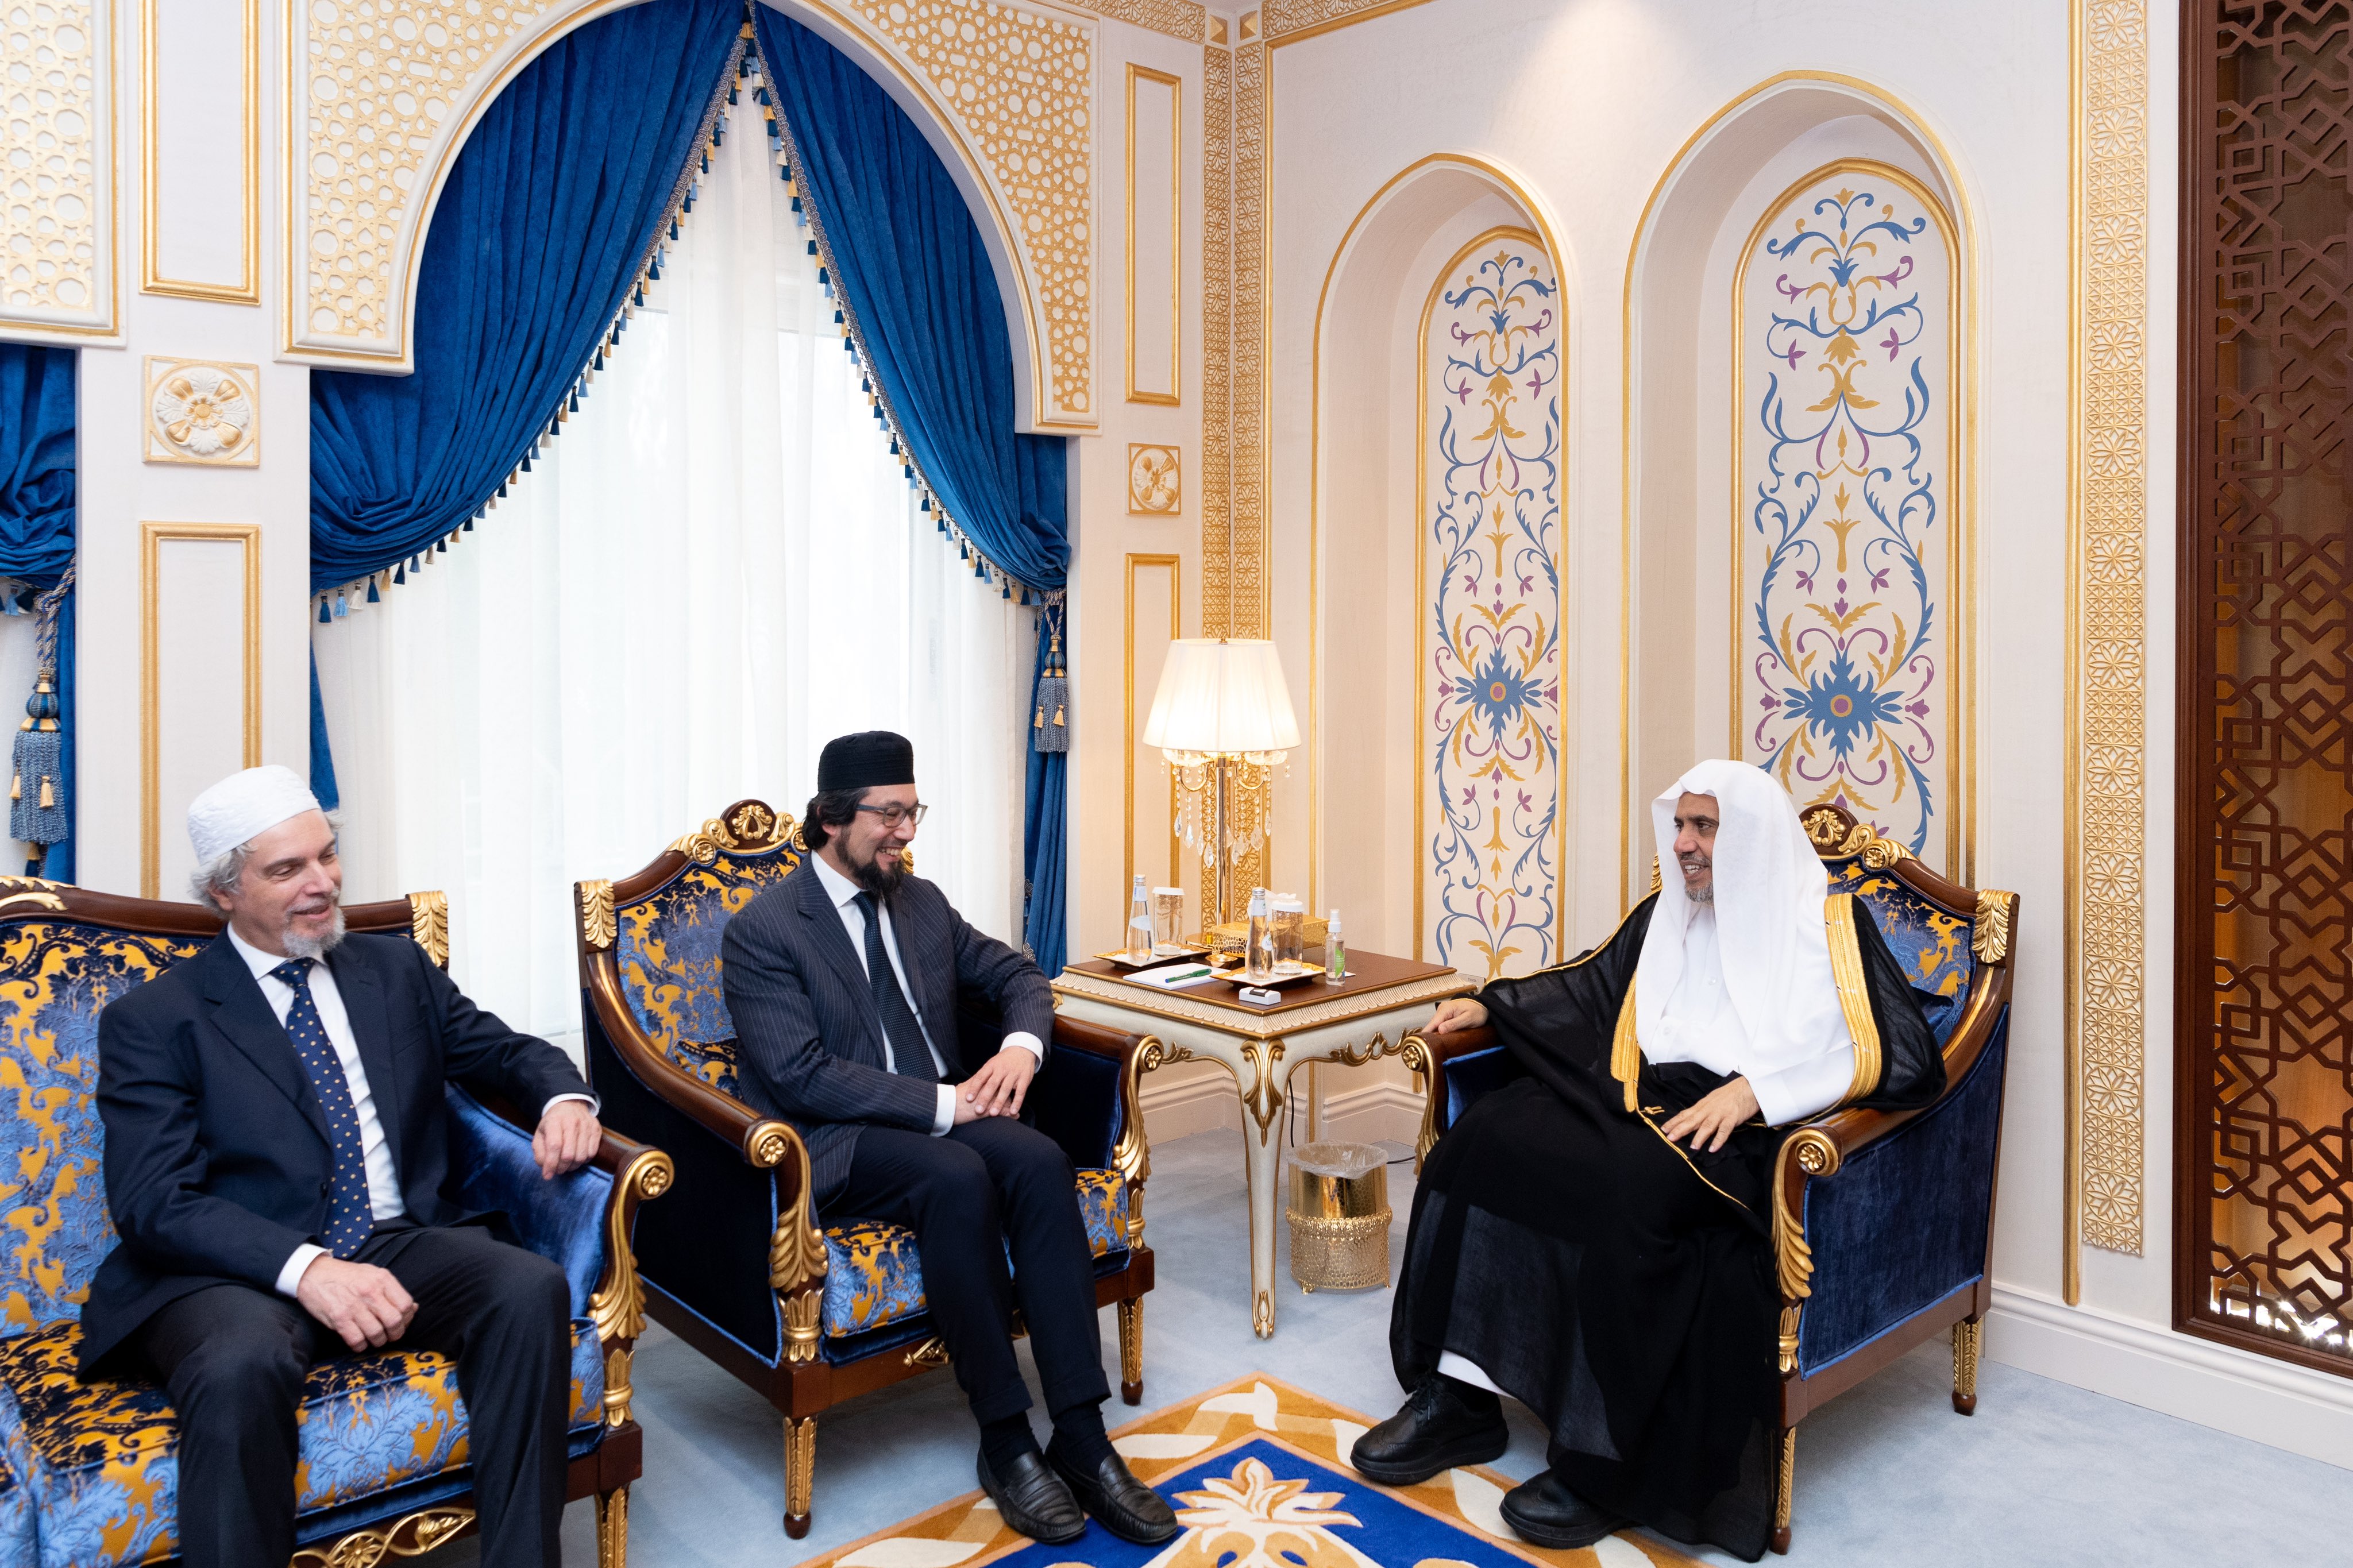 His Excellency Sheikh Dr. MohammedAl-Issa, Secretary-General of the MWL and Chairman of the Organization of Muslim Scholars, met with His Eminence Sheikh Yahya Pallavicini, President of the Italian COREIS (Islamic Religious Community) and the Muslim Council for Cooperation in Europe